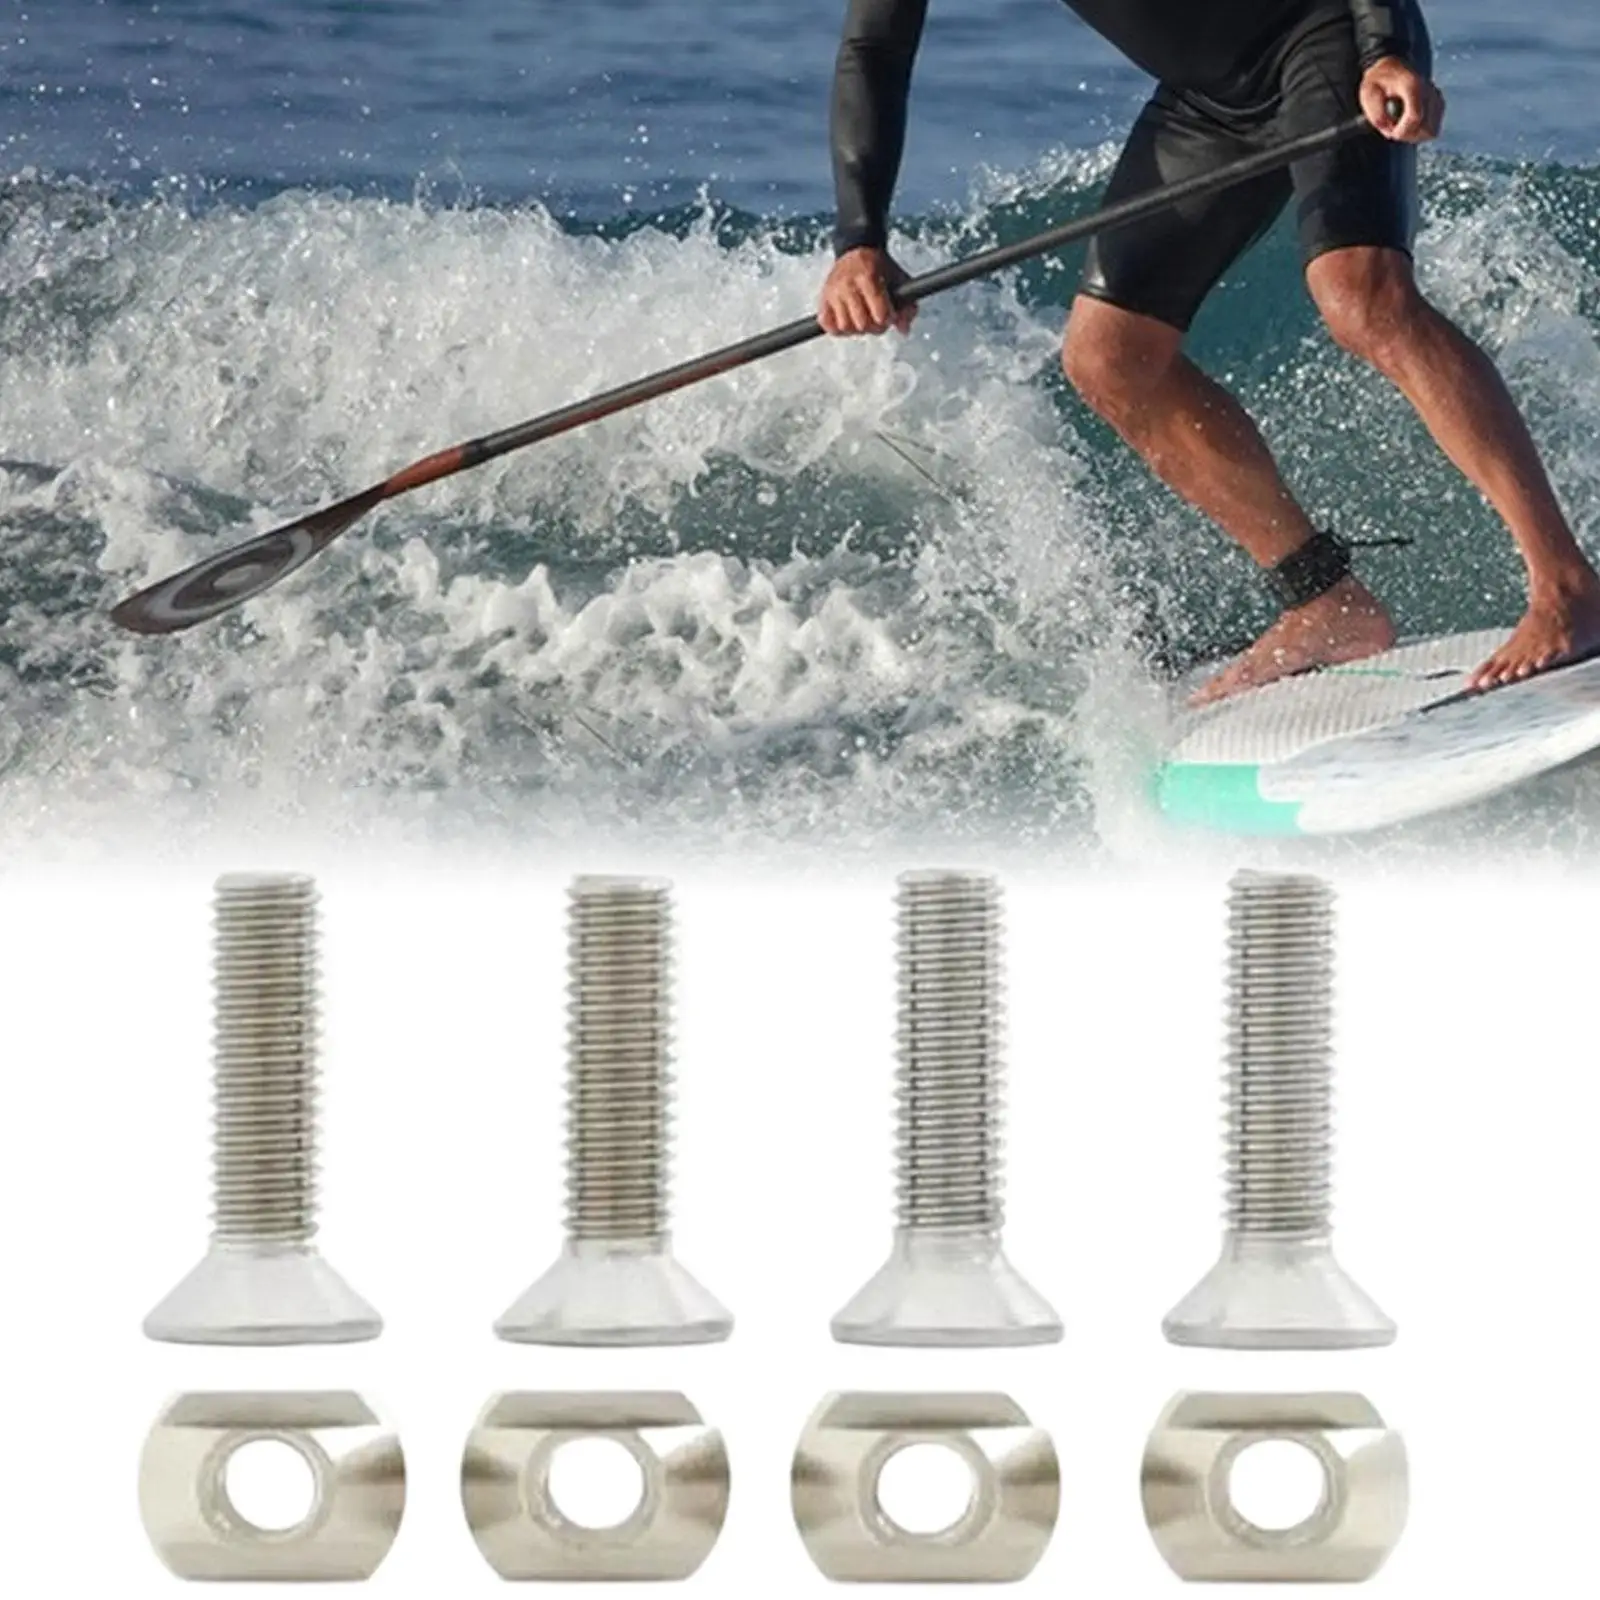 4 Pieces Surfboard Fin Screws Paddleboard Fin Screw No Tool Needed Surf Thumb Fin Screw and Plate for Outdoor Surfing Summer